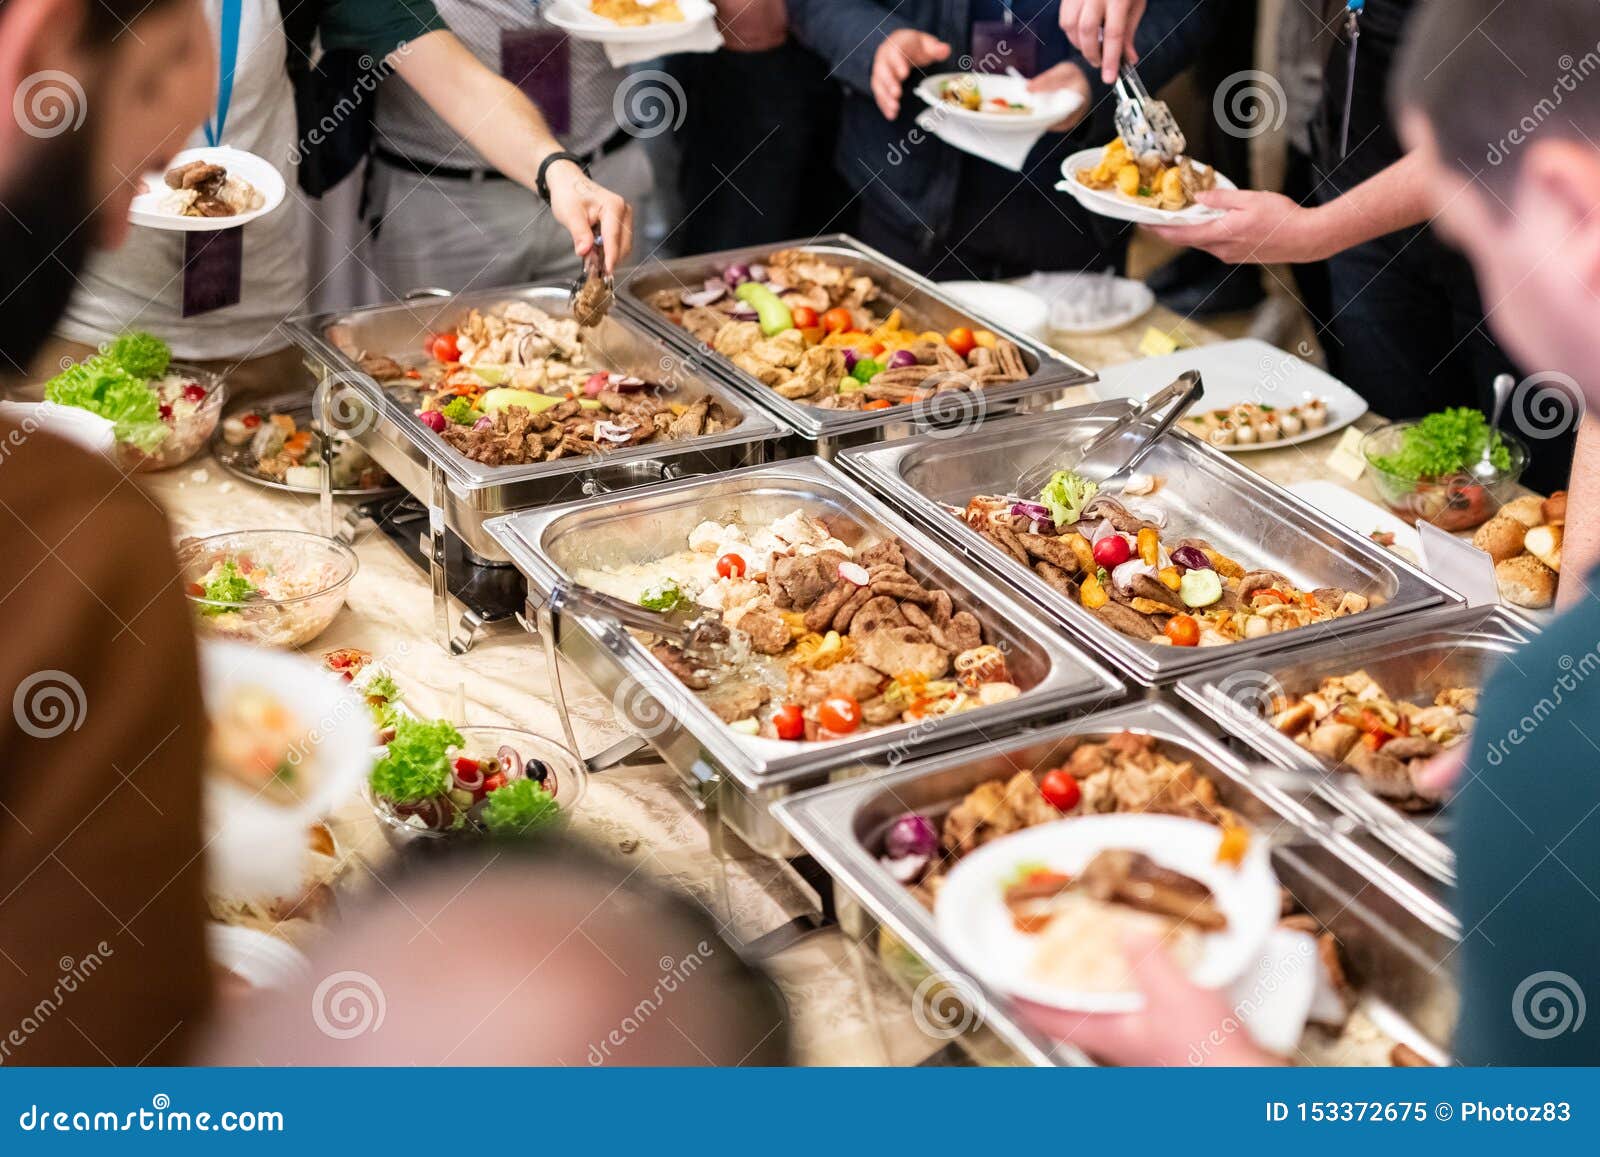 Buffet Food, Catering Food Party at Restaurant, Mini Canapes, Snacks and  Appetizers Stock Image - Image of celebration, broil: 153372675